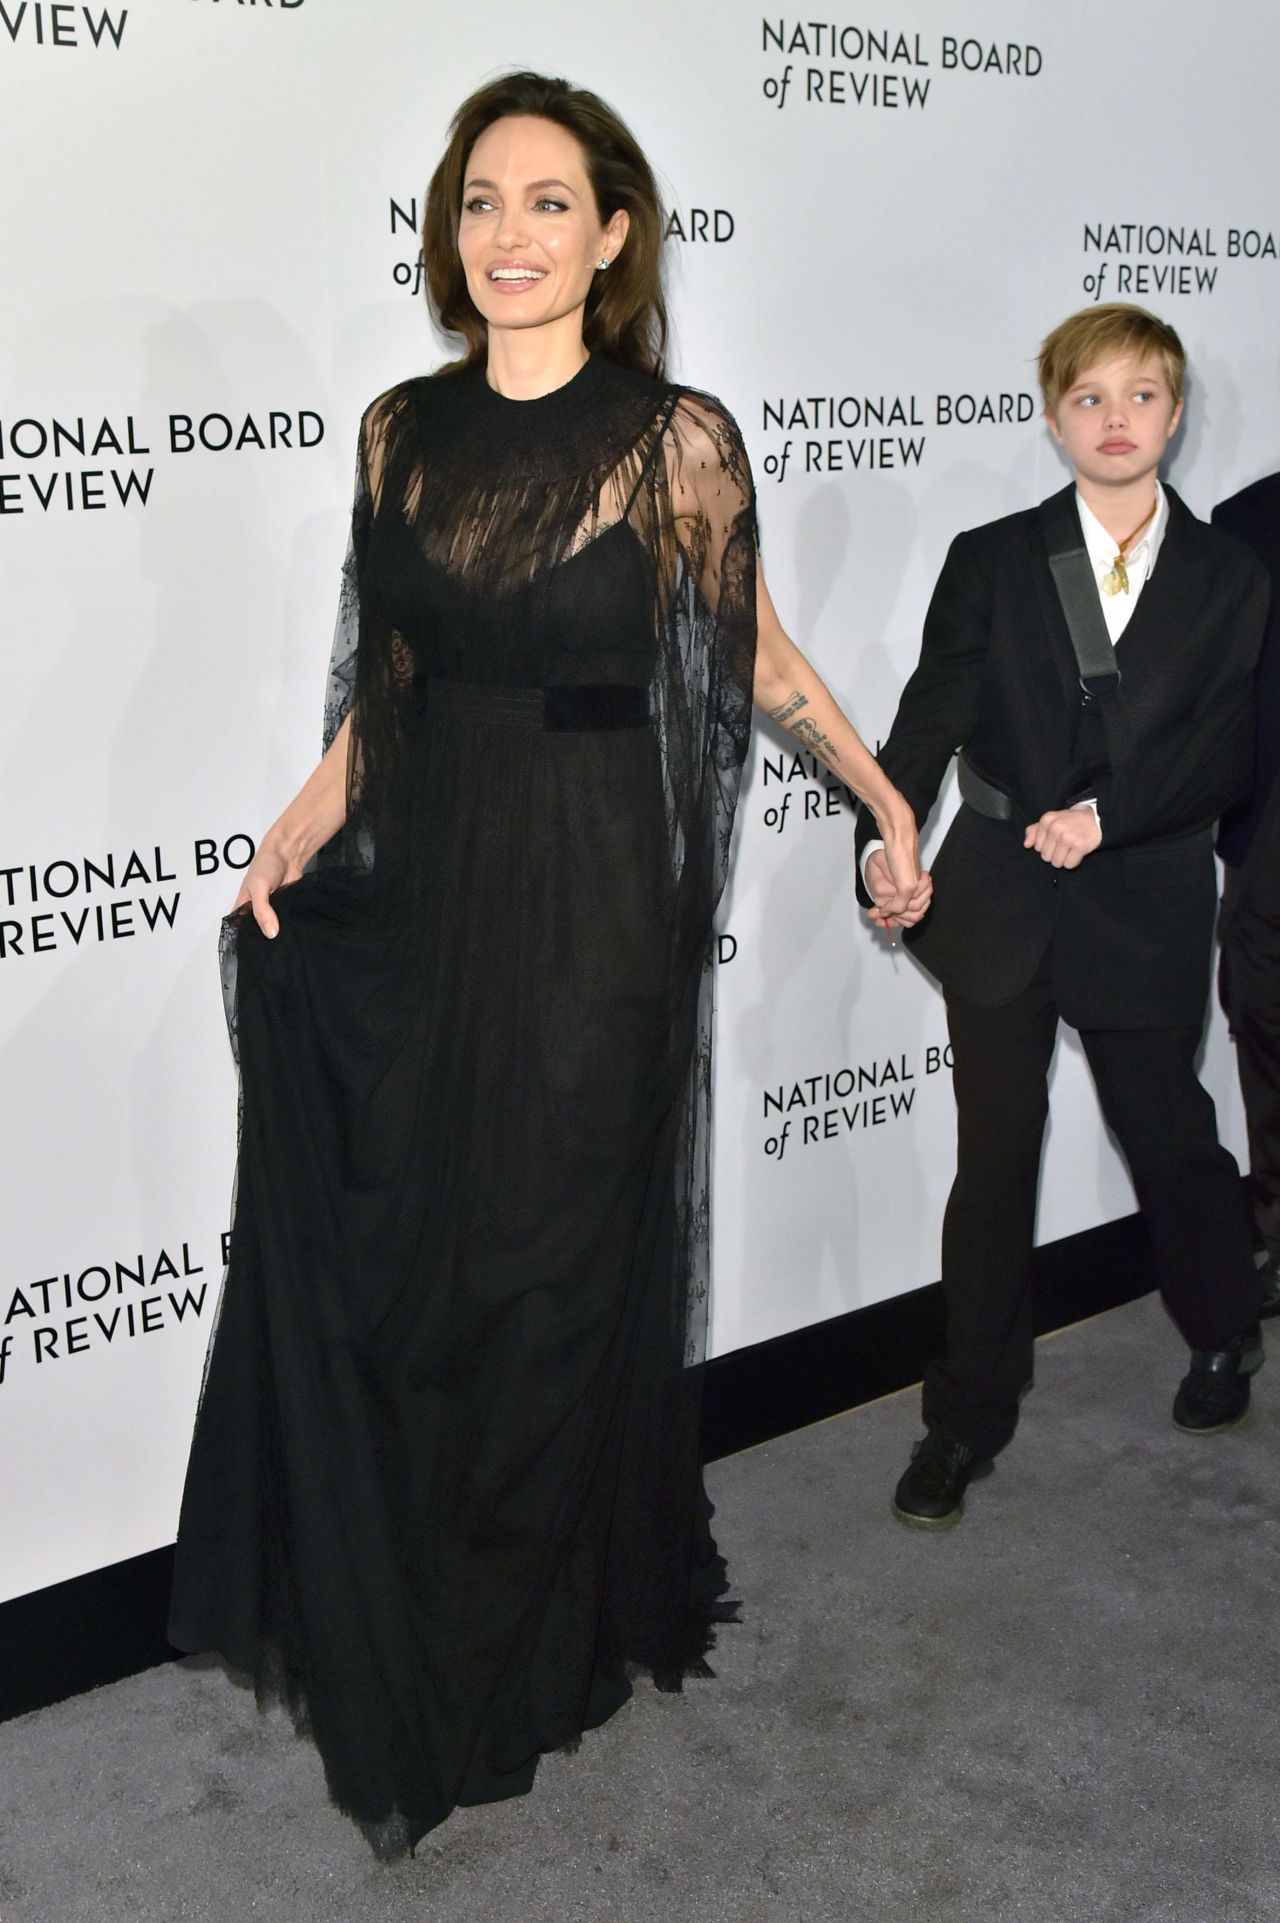 https://celebmafia.com/wp-content/uploads/2018/01/angelina-jolie-the-national-board-of-review-annual-awards-gala-in-nyc-5.jpg